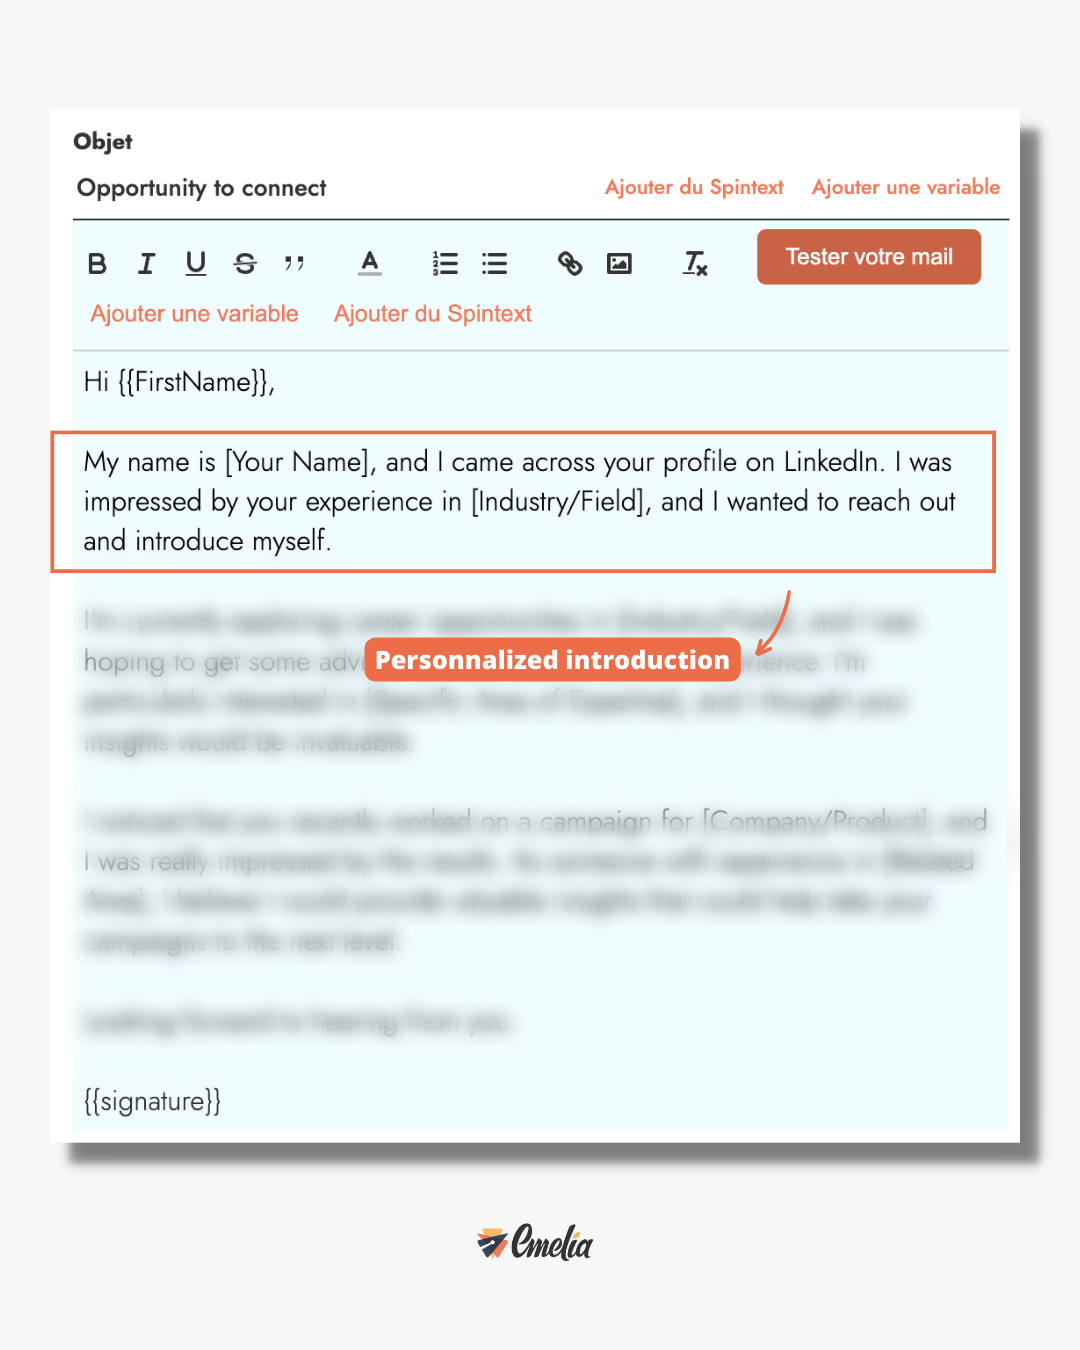 cold email personnalized introduction